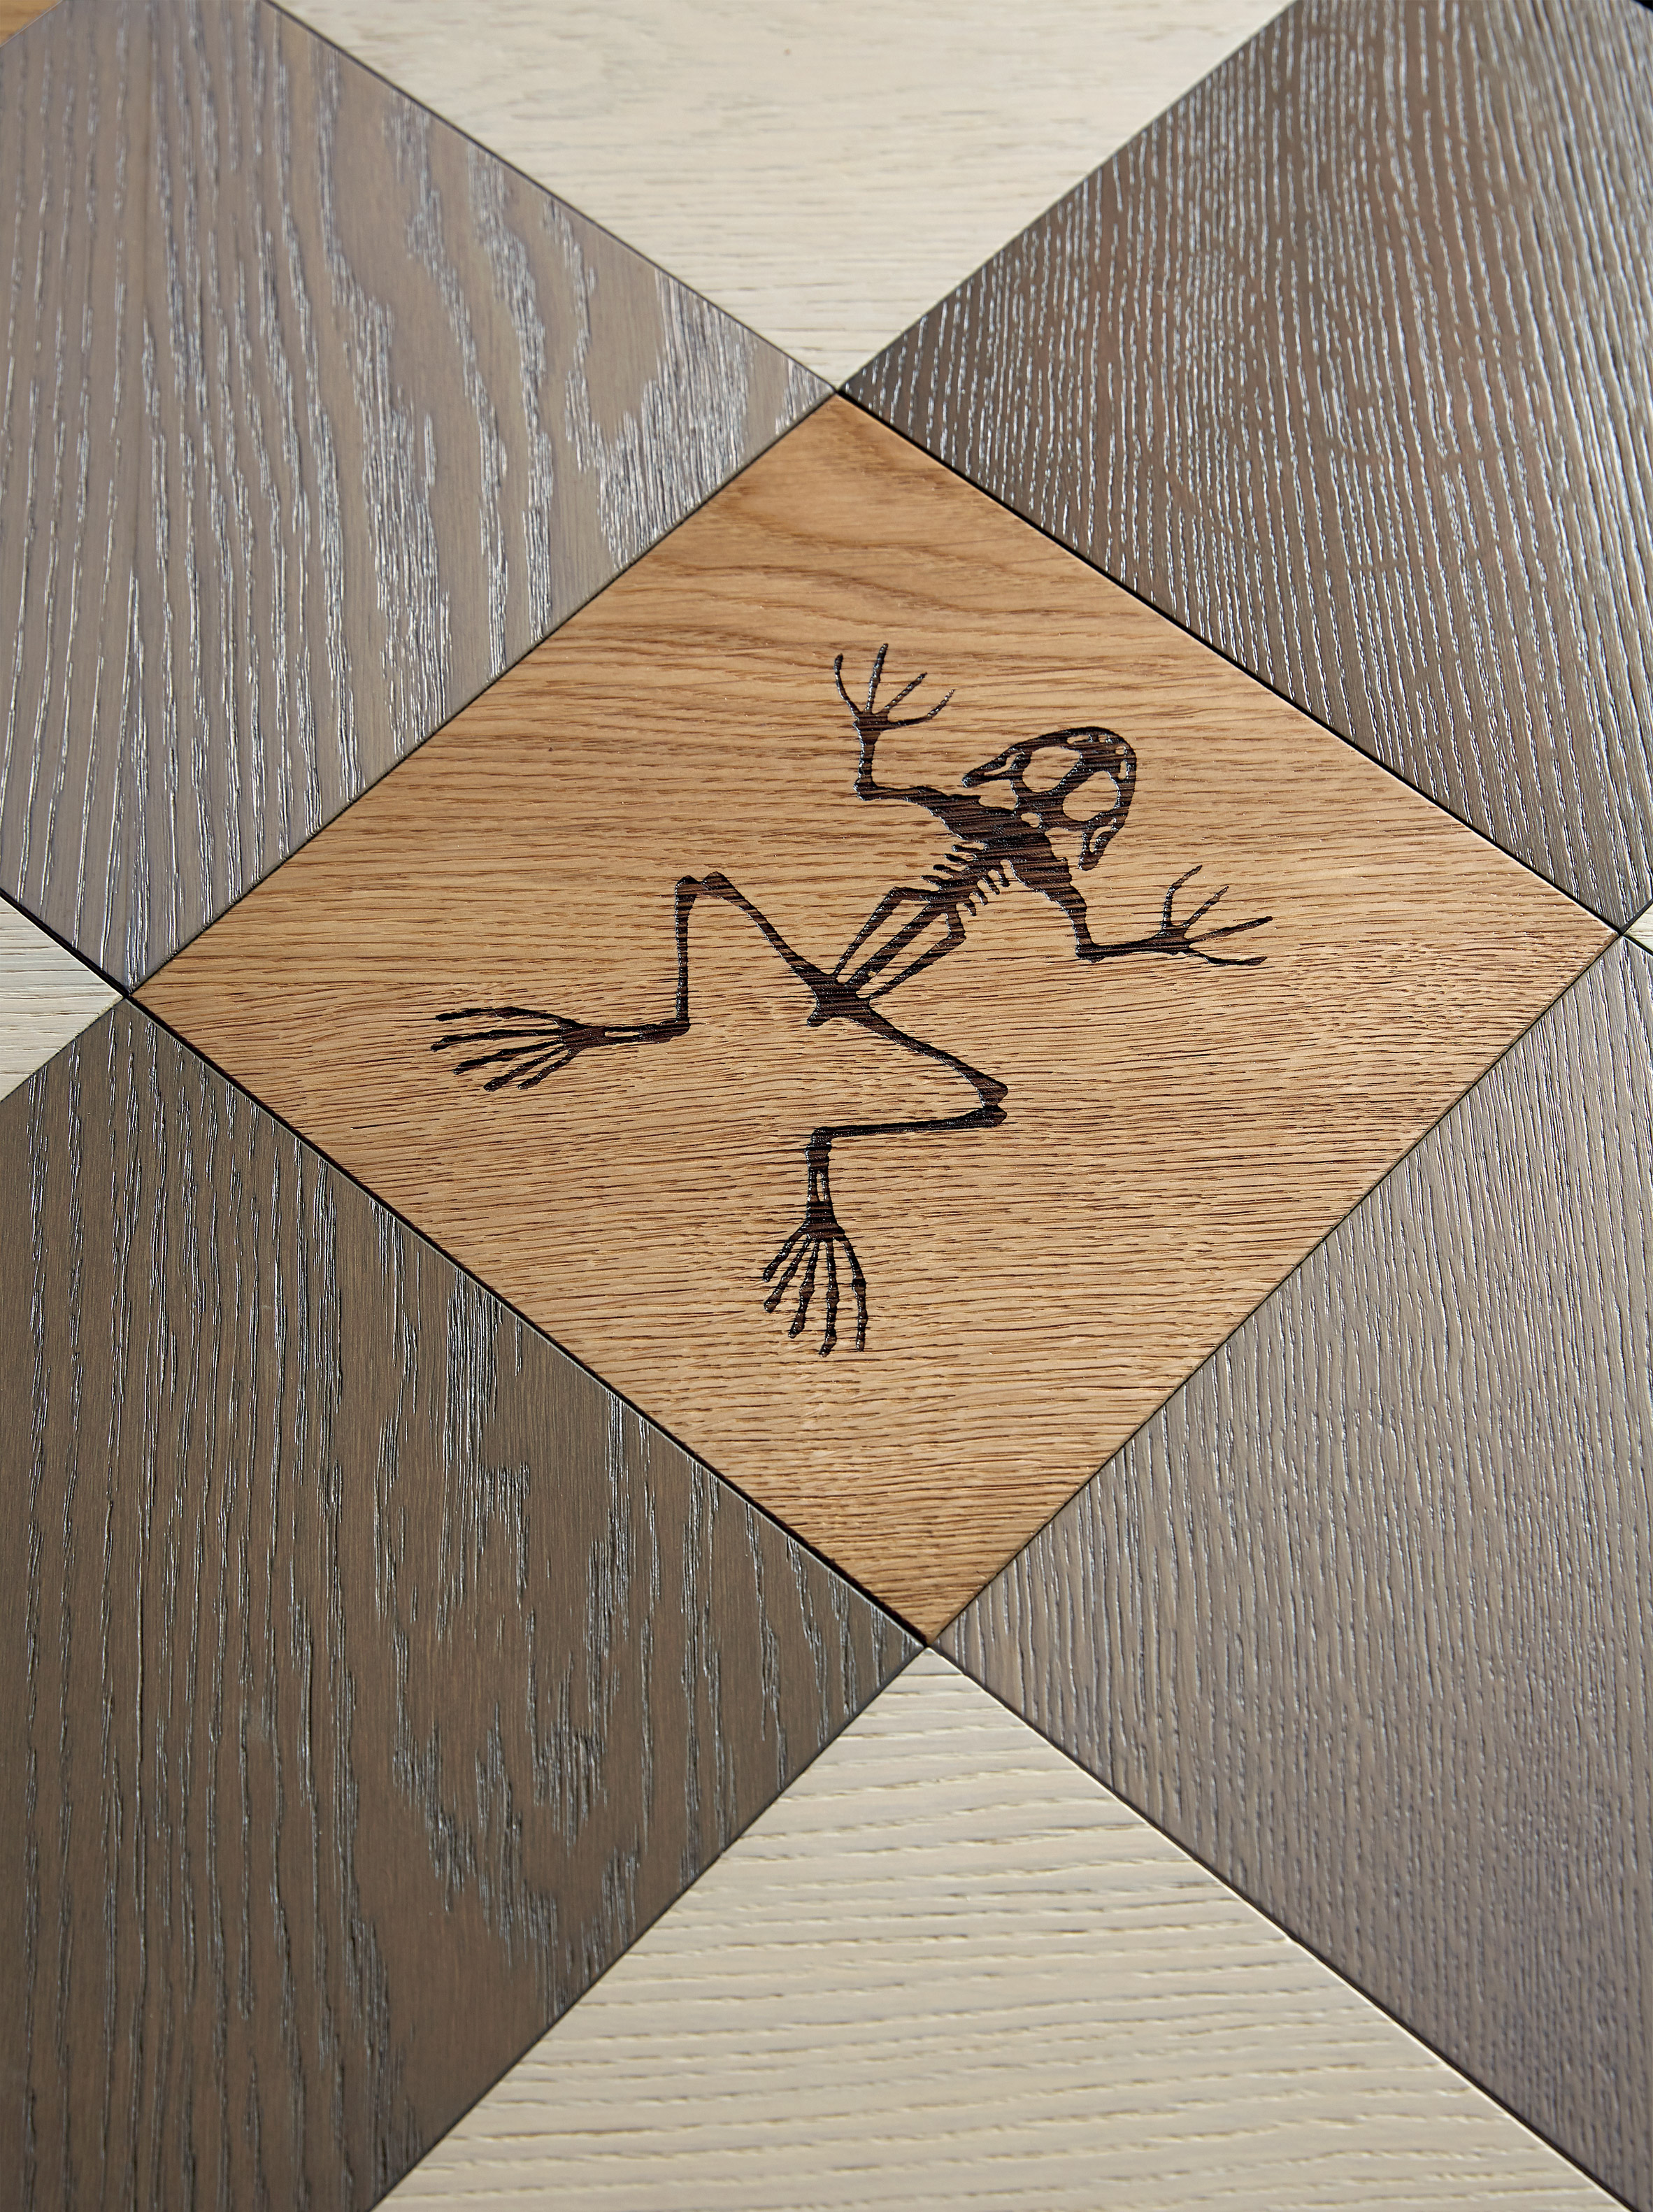 Studio Job engraves fossils in flooring for first parquet collection